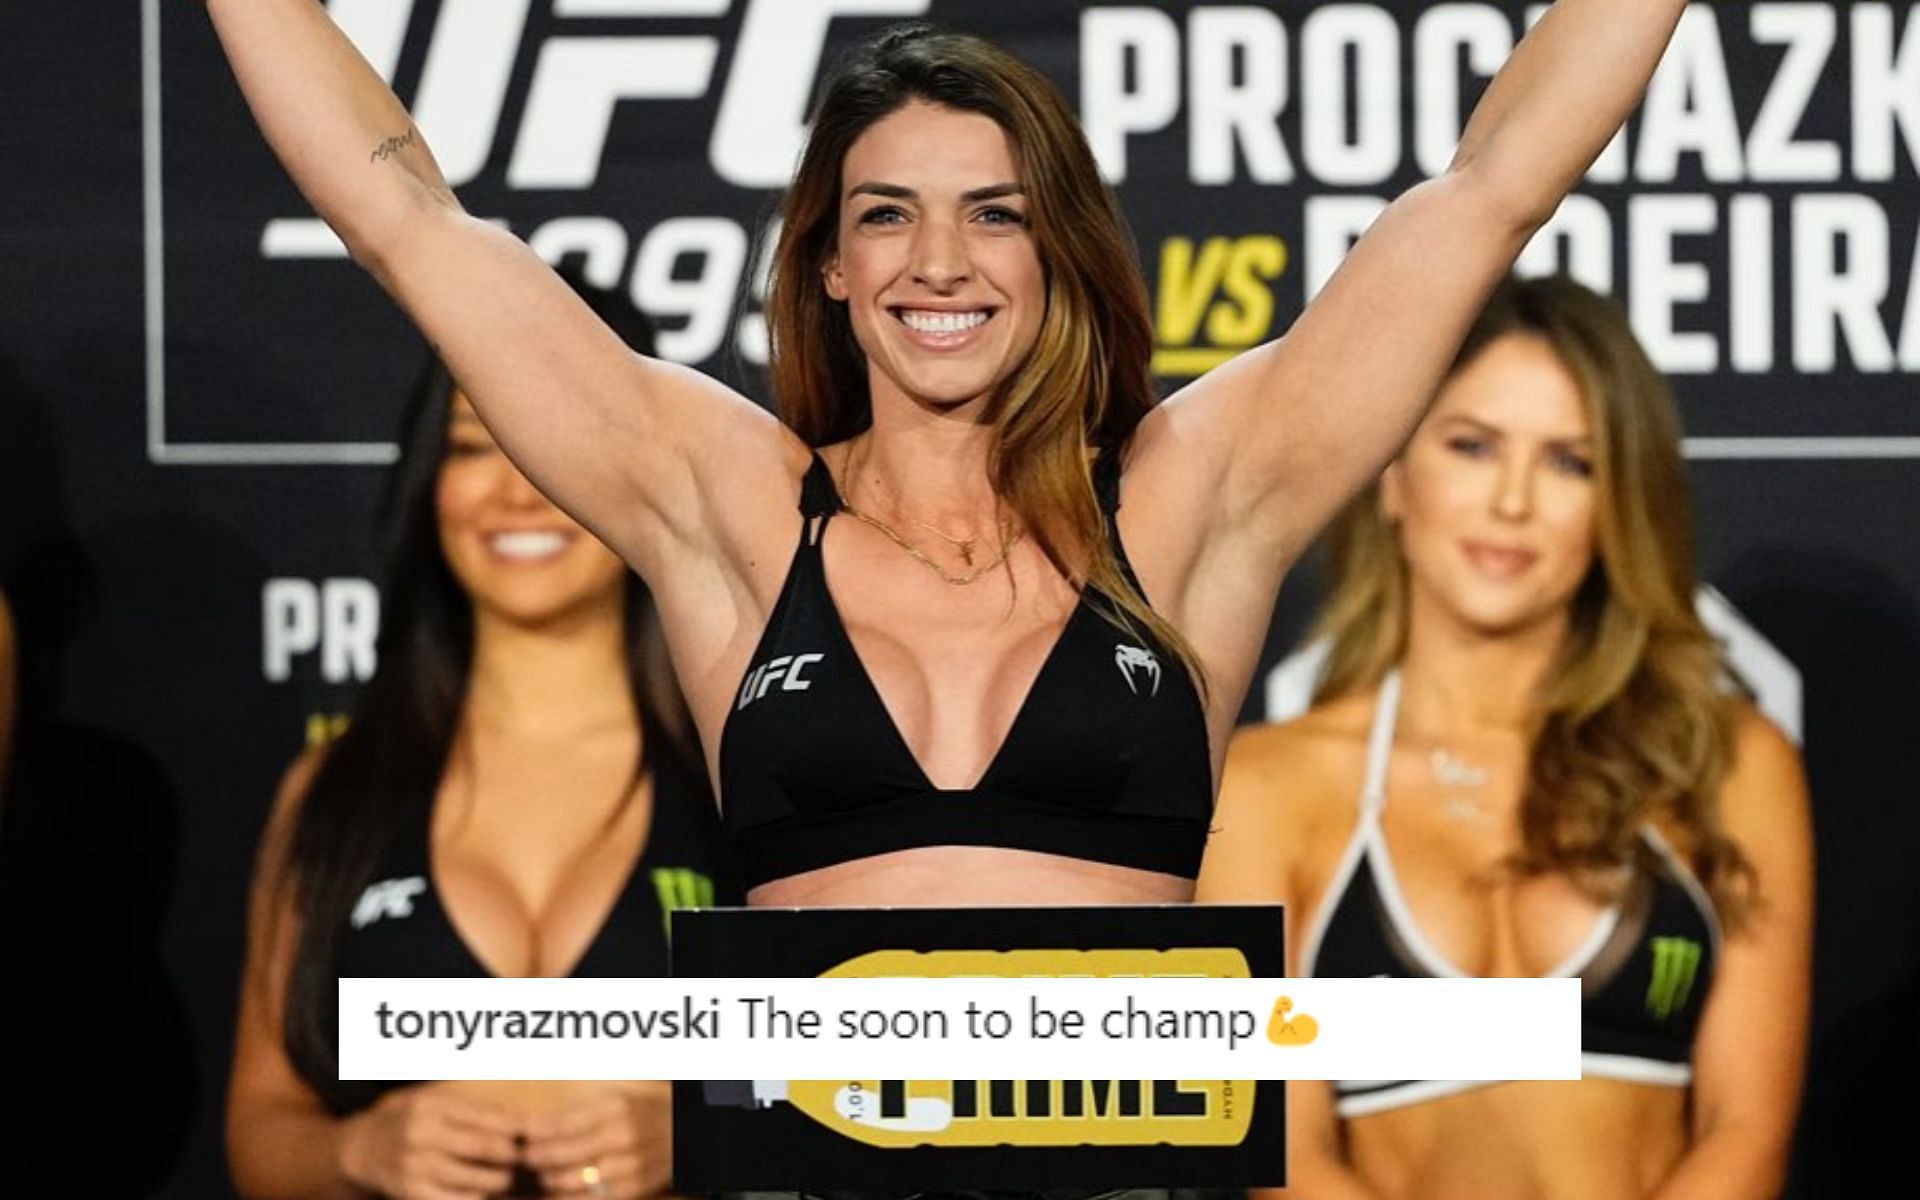 You are a dream - Fans react to Mackenzie Dern's latest workout